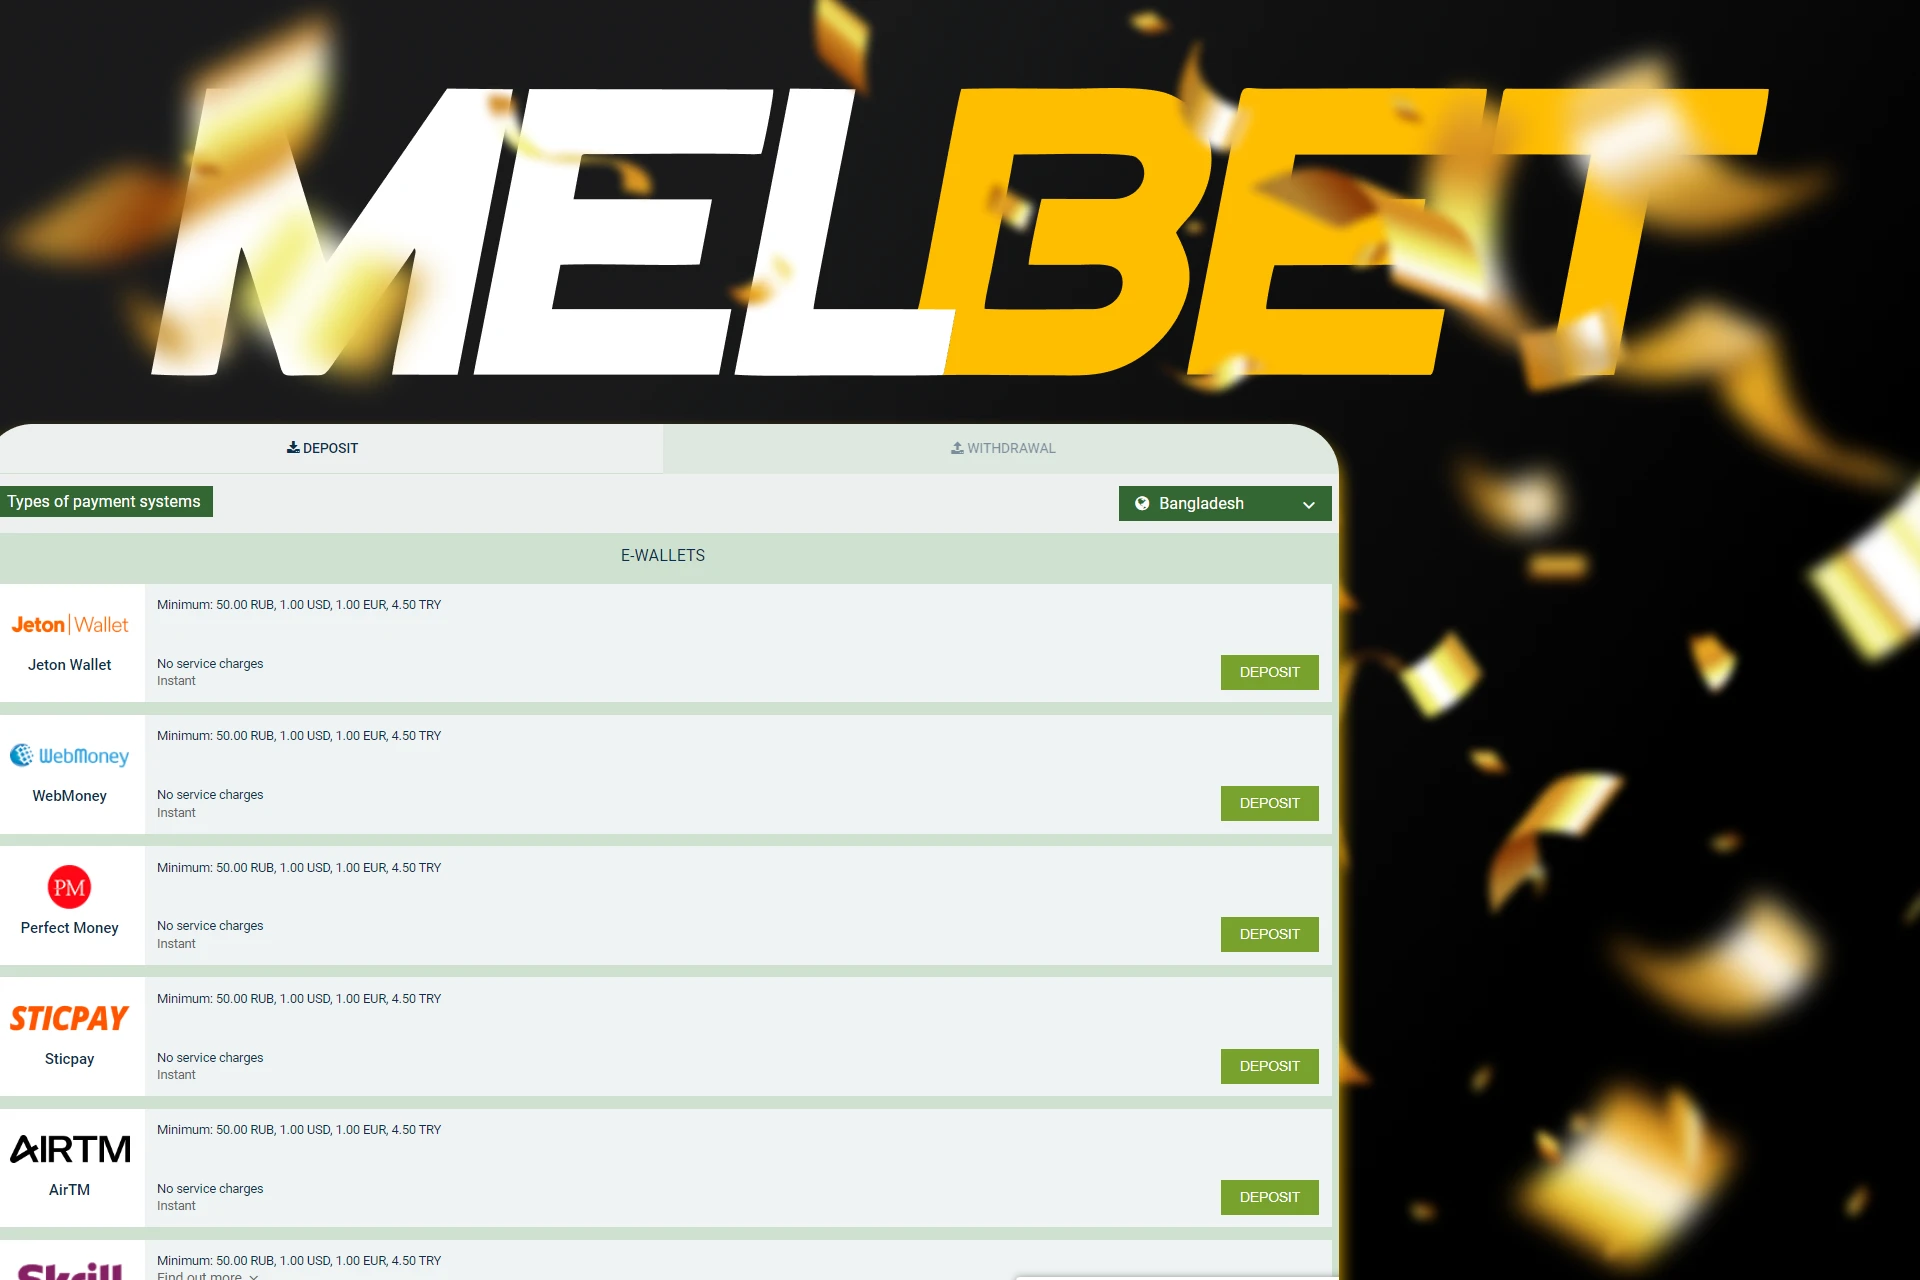 You need to meet several requirements to withdraw Melbet bonuses.